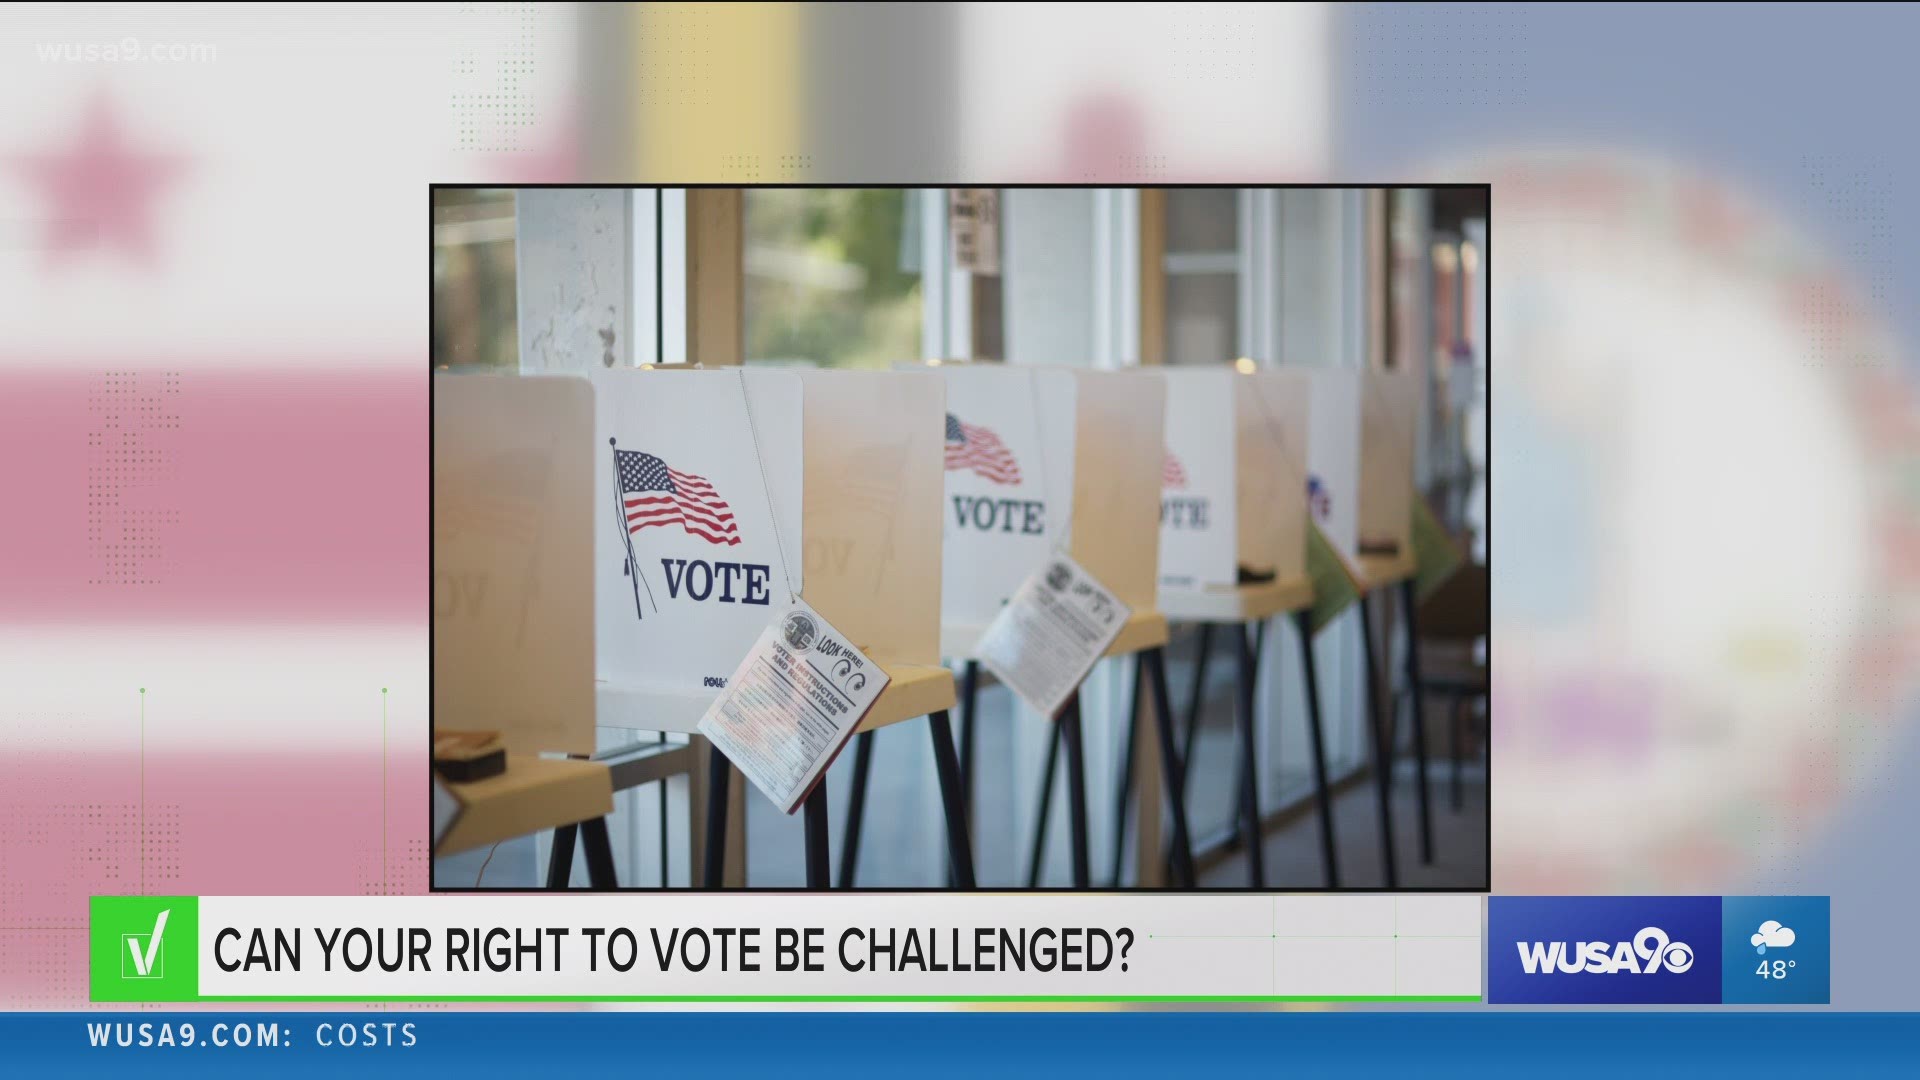 As early voting begins, some viewers are concerned about having their right to vote challenged.